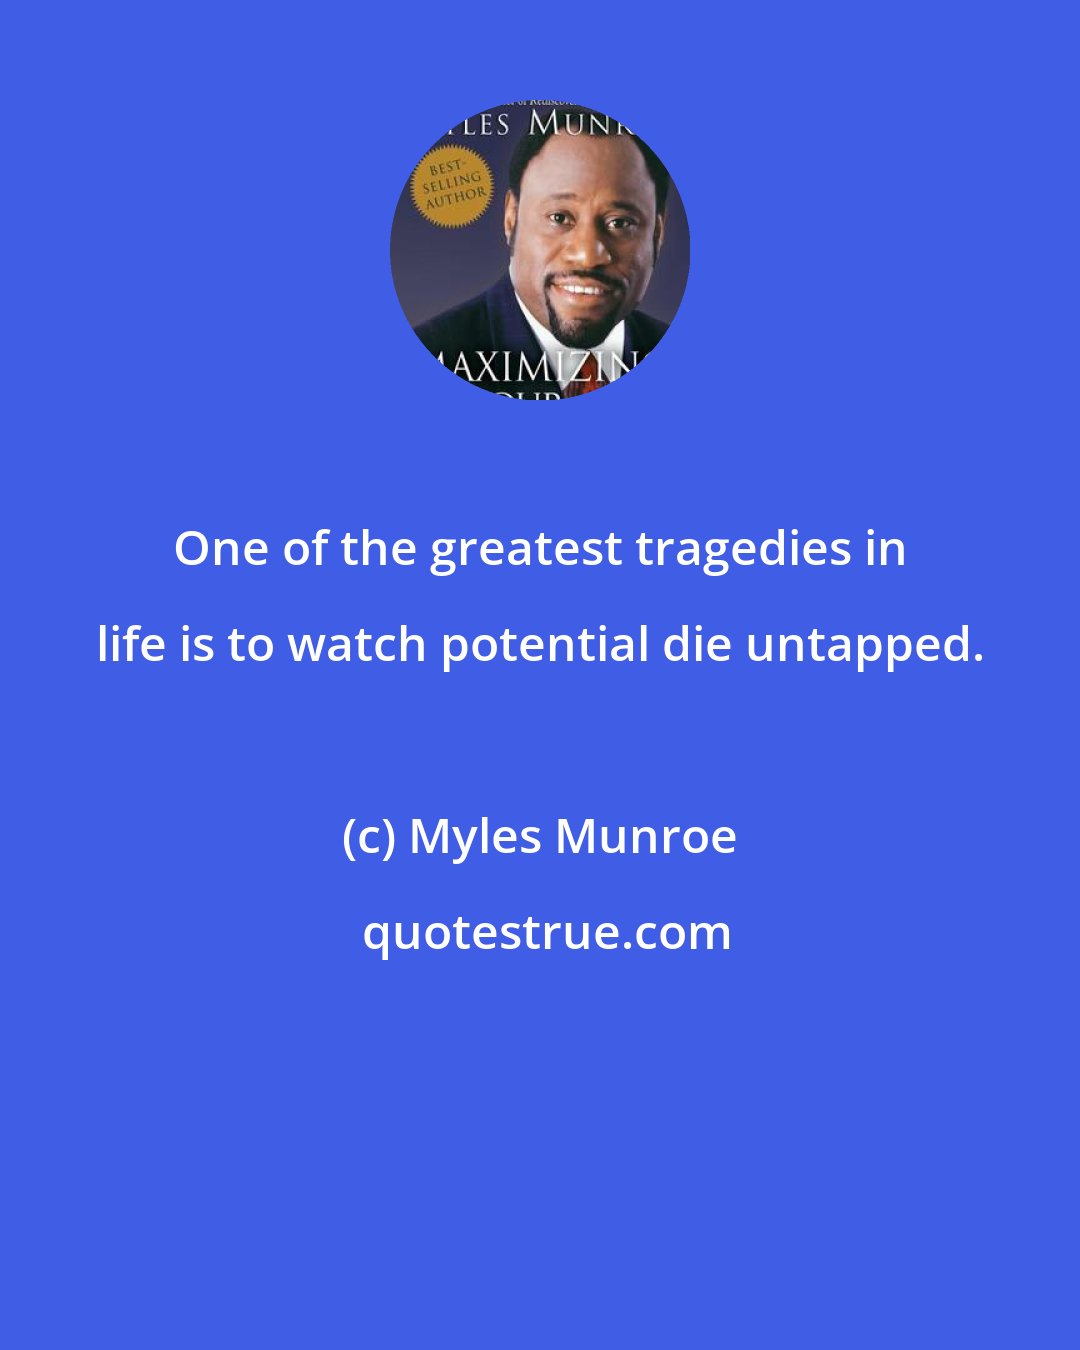 Myles Munroe: One of the greatest tragedies in life is to watch potential die untapped.